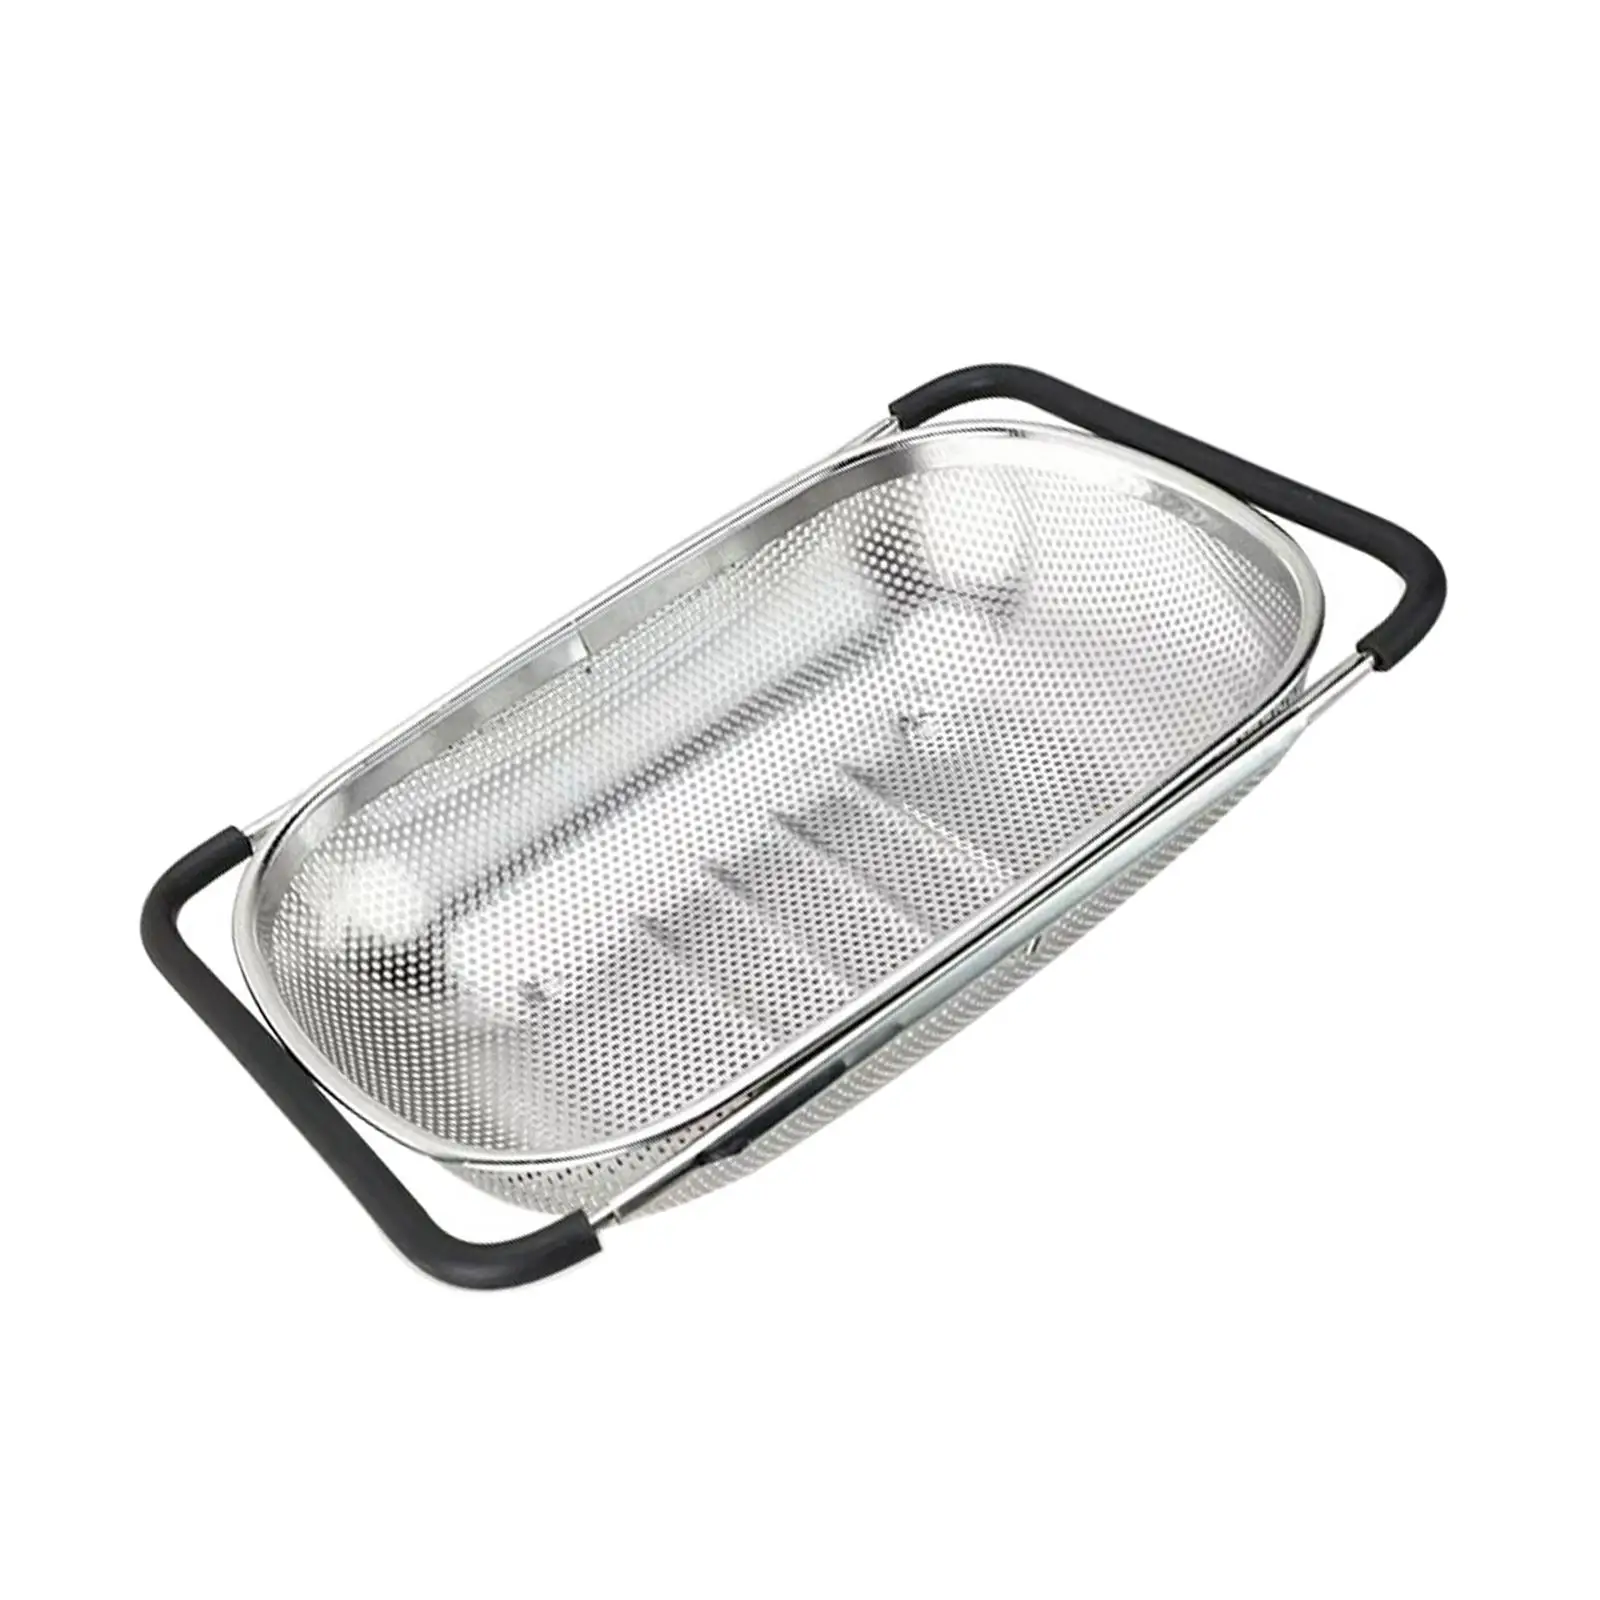 Colander Strainer Basket Expandable Accessories with 800 Mesh Fine Mesh Oval Safety Easy to Clean over The Sink Stainless Steel